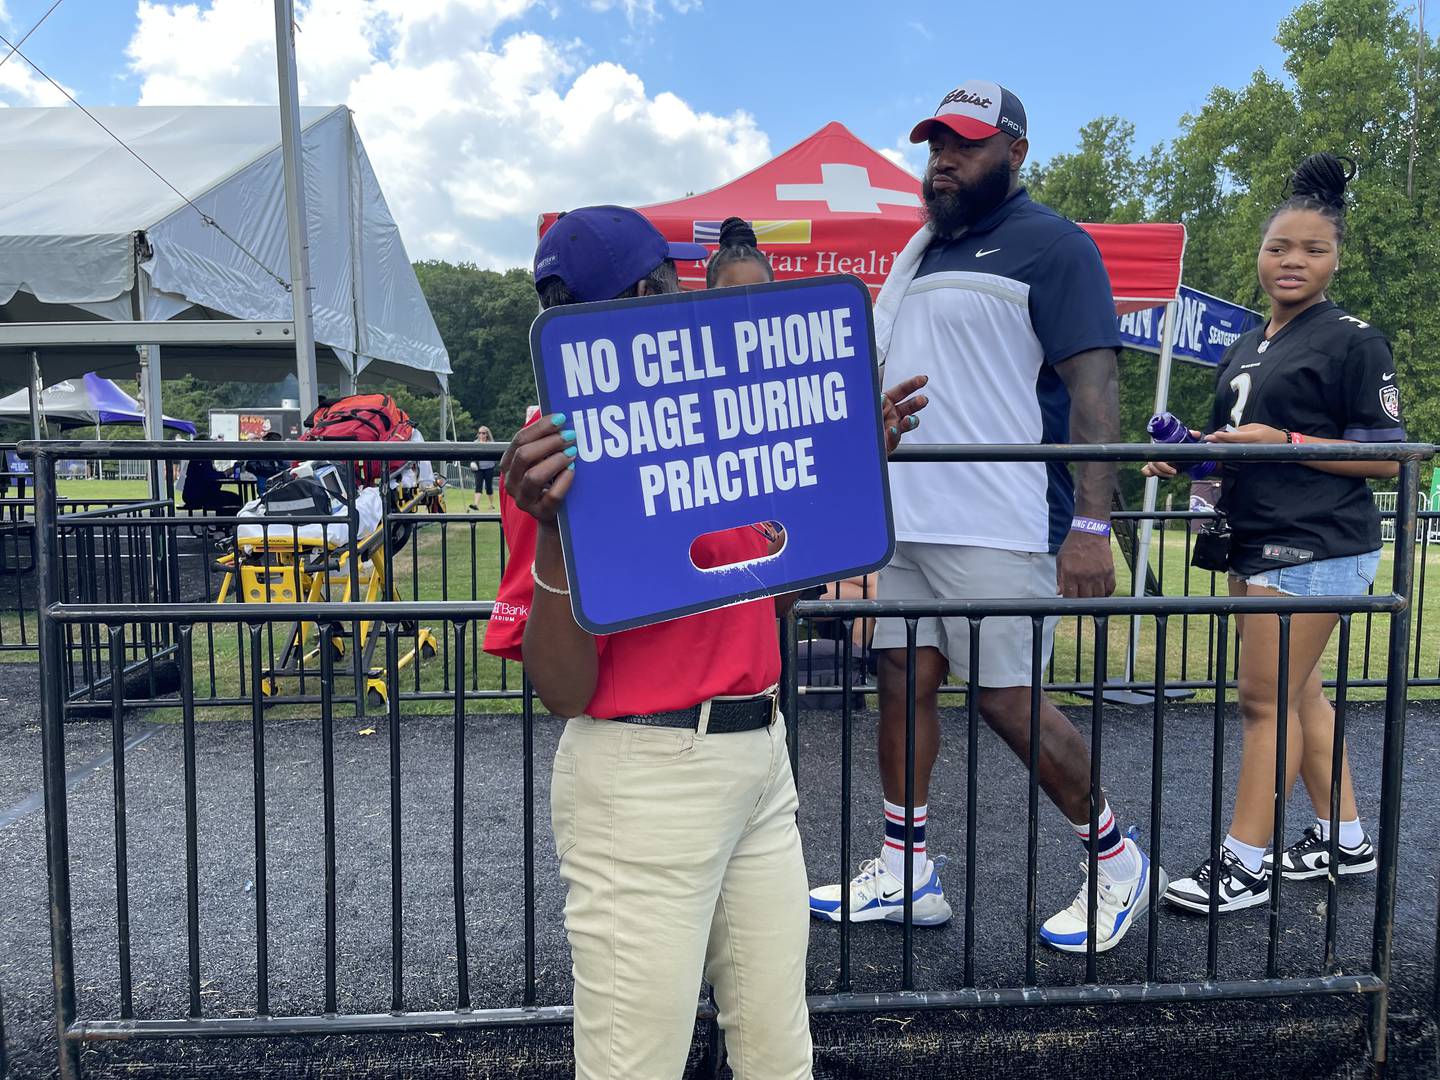 An employee from S.A.F.E., the security company, with a sign that says "NoCell Phone Usage During Practice."